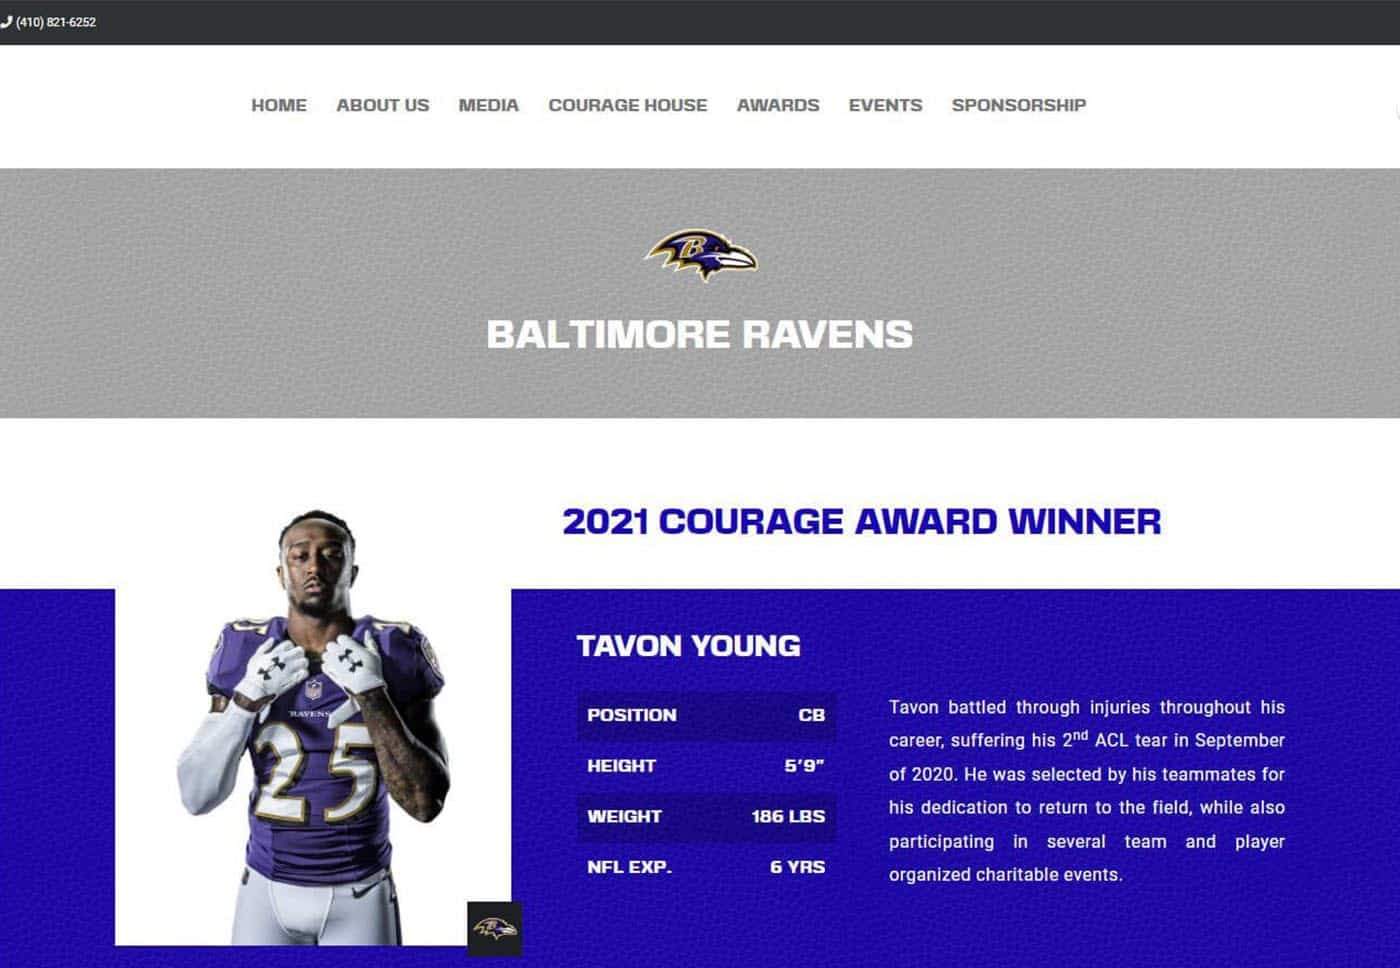 Ed Block Courage Award Foundation website home page